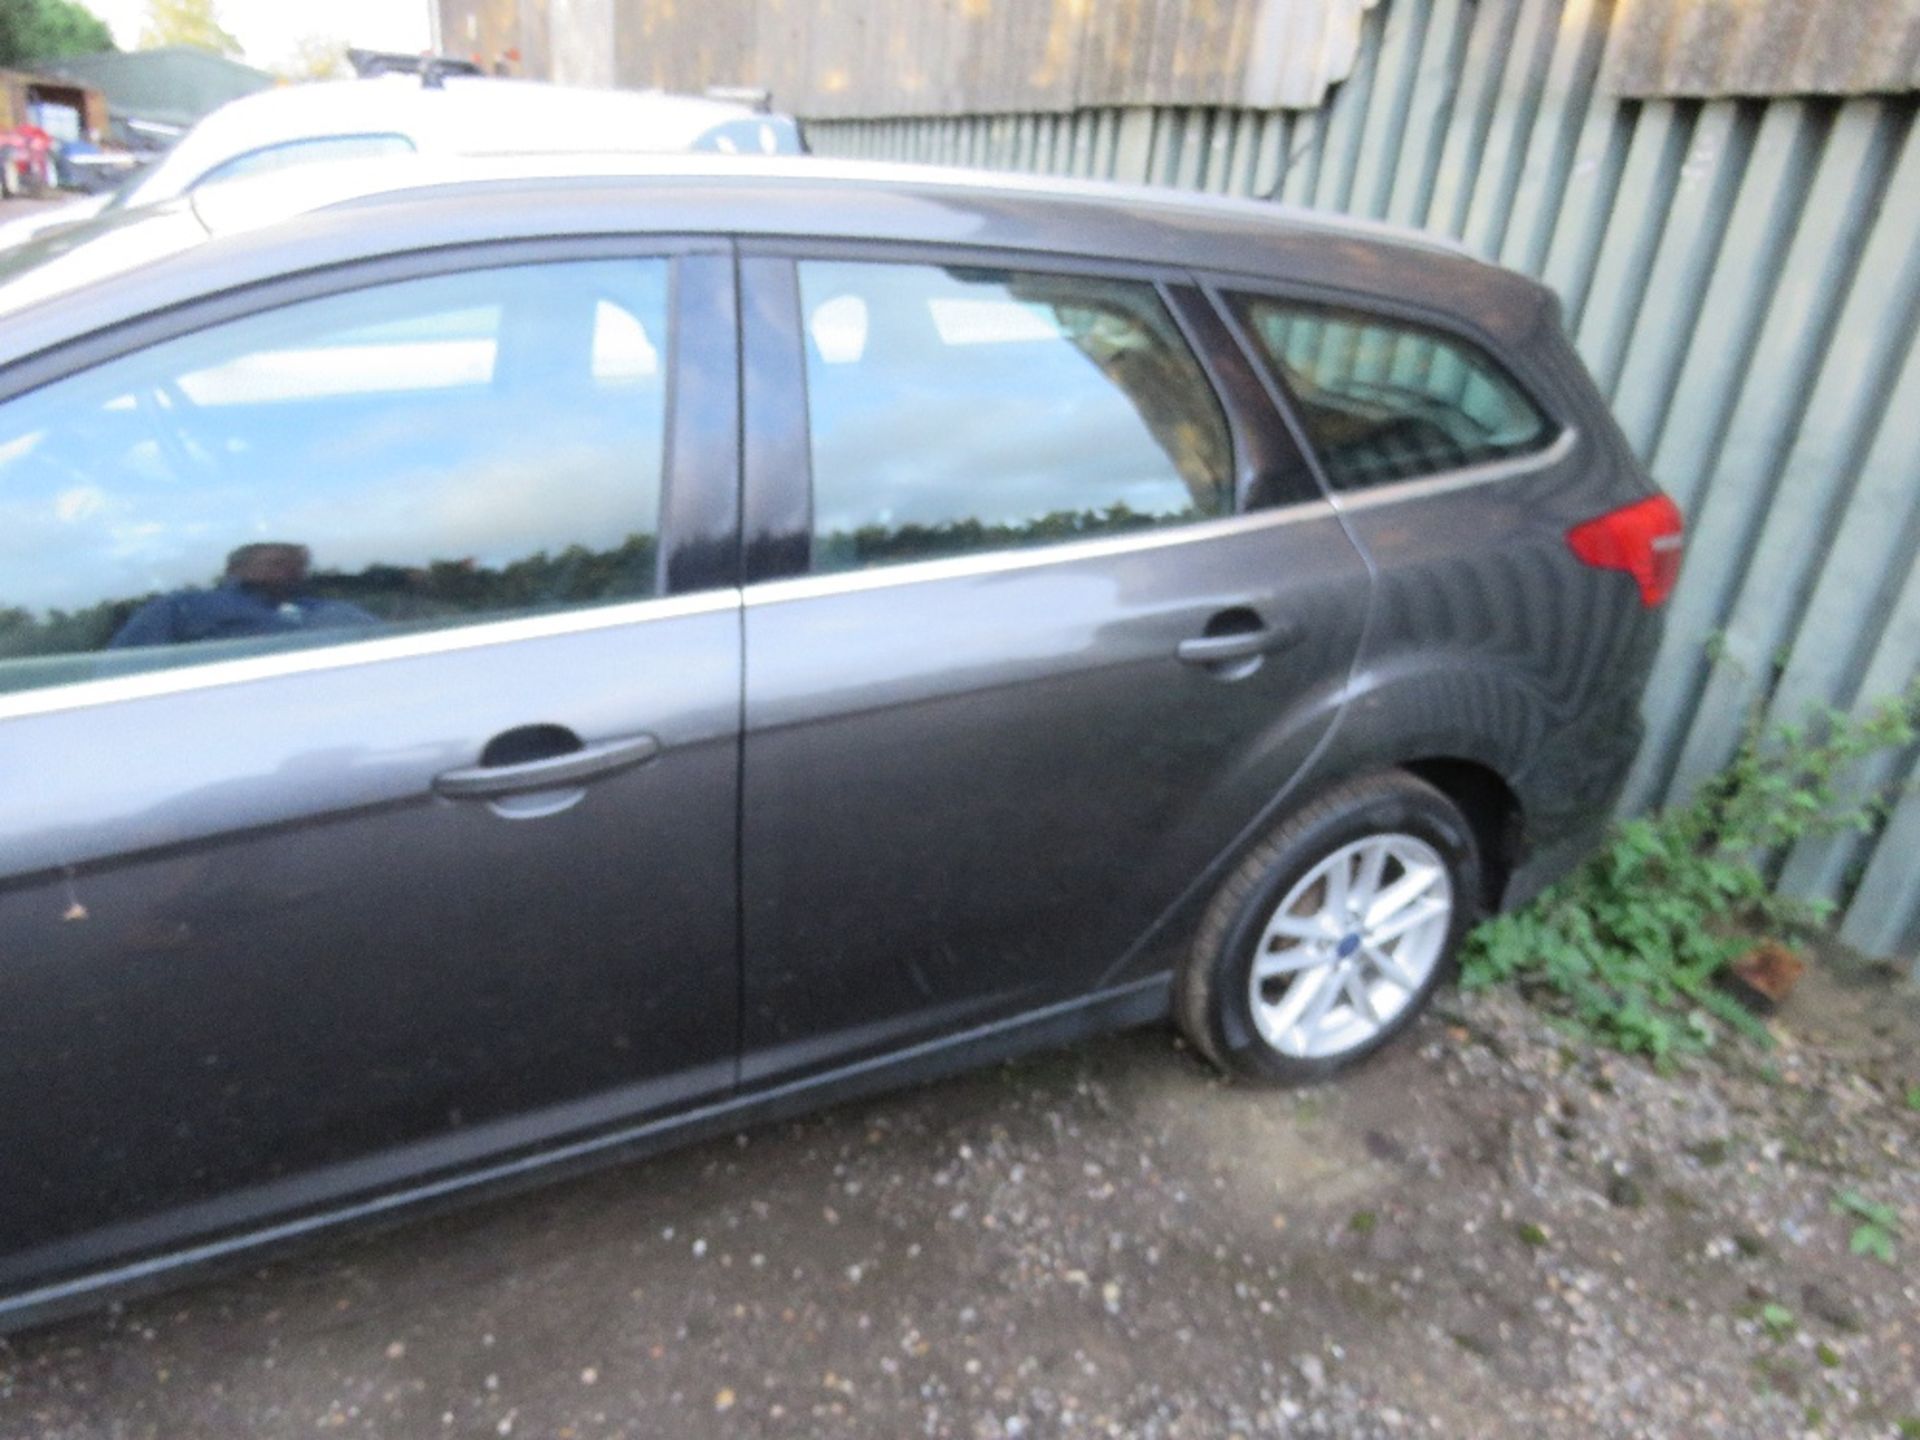 FORD FOCUS ESTATE CAR REG:MK15 XAY. SOLD AS NON RUNNER/ ENGINE REQUIRING ATTENTION. WITH V5 - Image 4 of 11